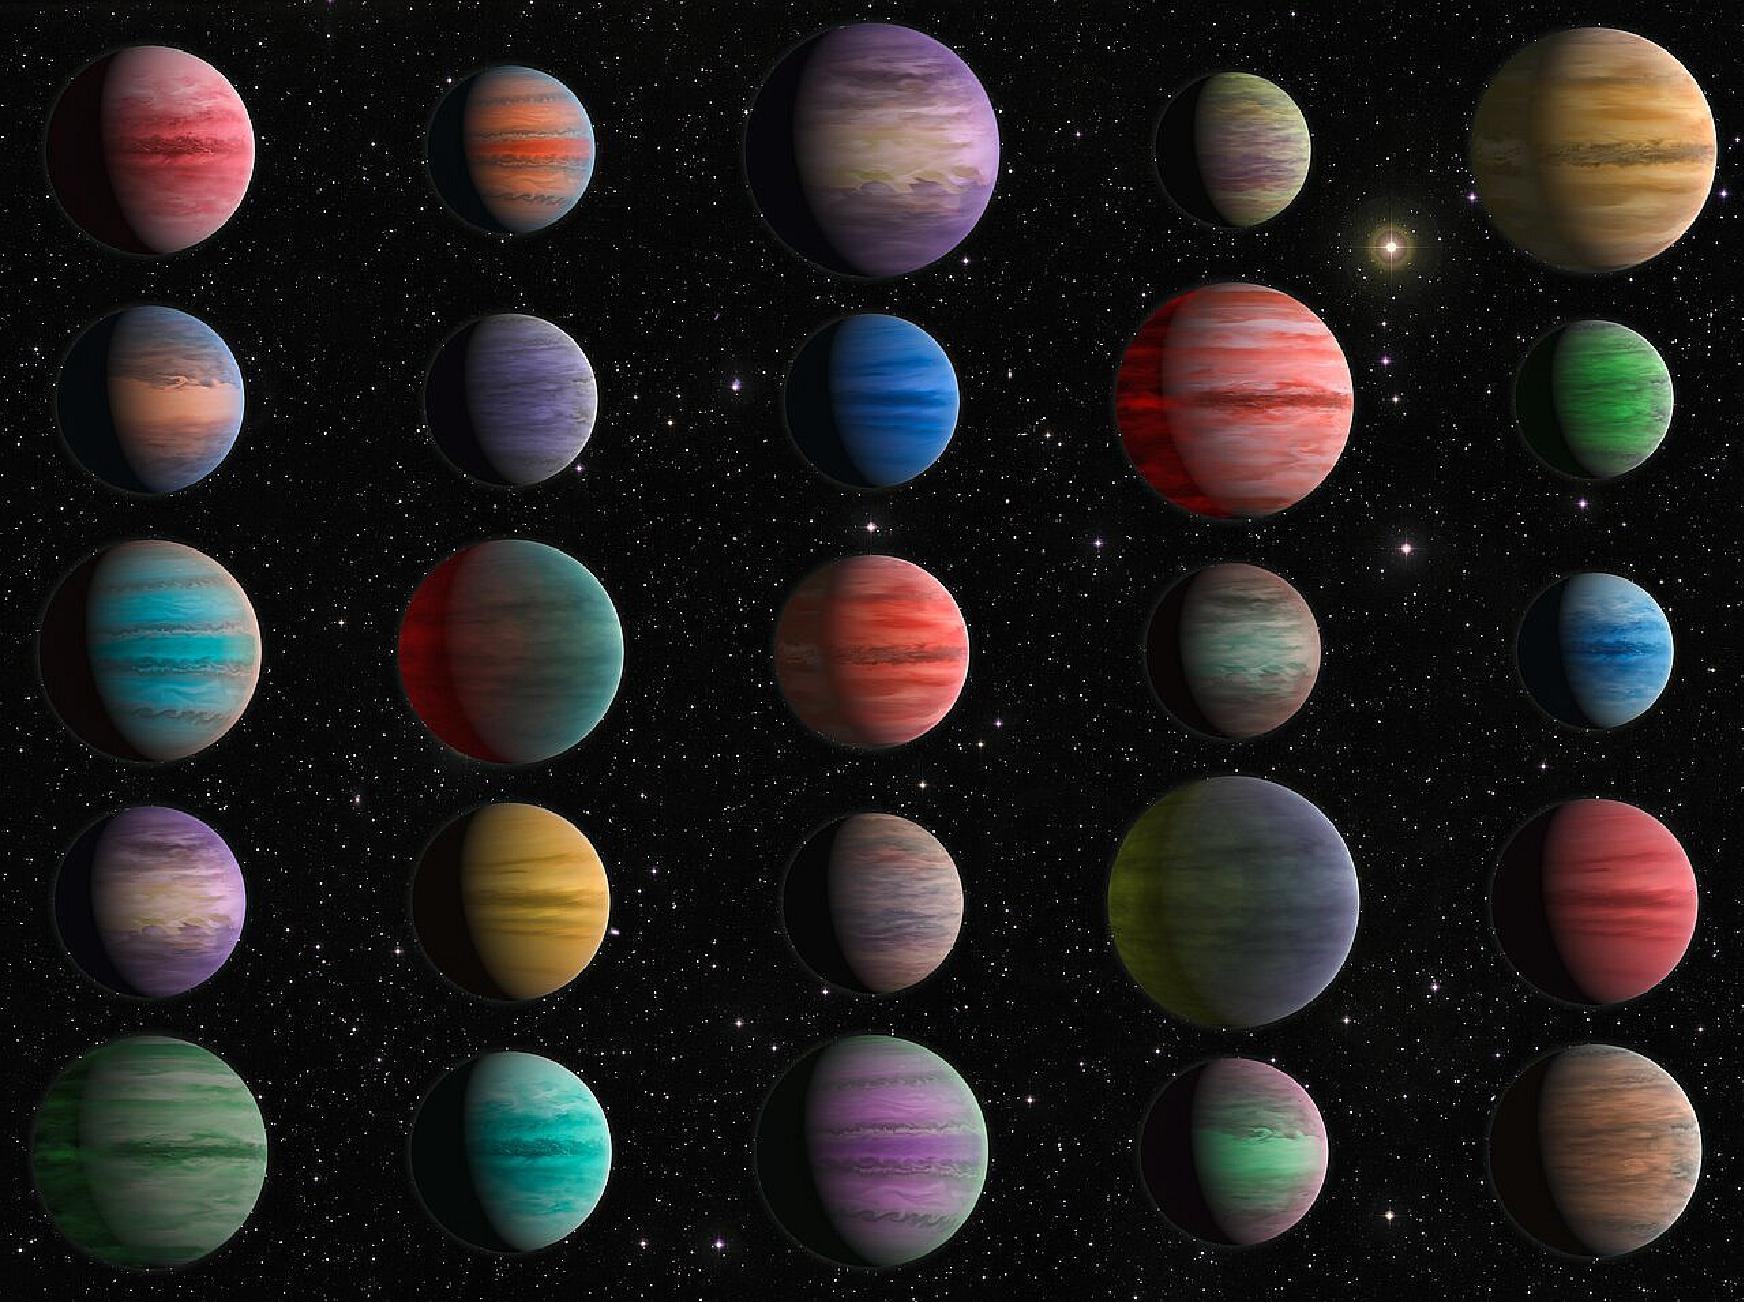 Figure 50: Archival observations of 25 hot Jupiters by the NASA/ESA Hubble Space Telescope have been analysed by an international team of astronomers, enabling them to answer five open questions important to our understanding of exoplanet atmospheres. Amongst other findings, the team found that the presence of metal oxides and hydrides in the hottest exoplanet atmospheres was clearly correlated with the atmospheres' being thermally inverted (image credit: ESA/Hubble, N. Bartmann)